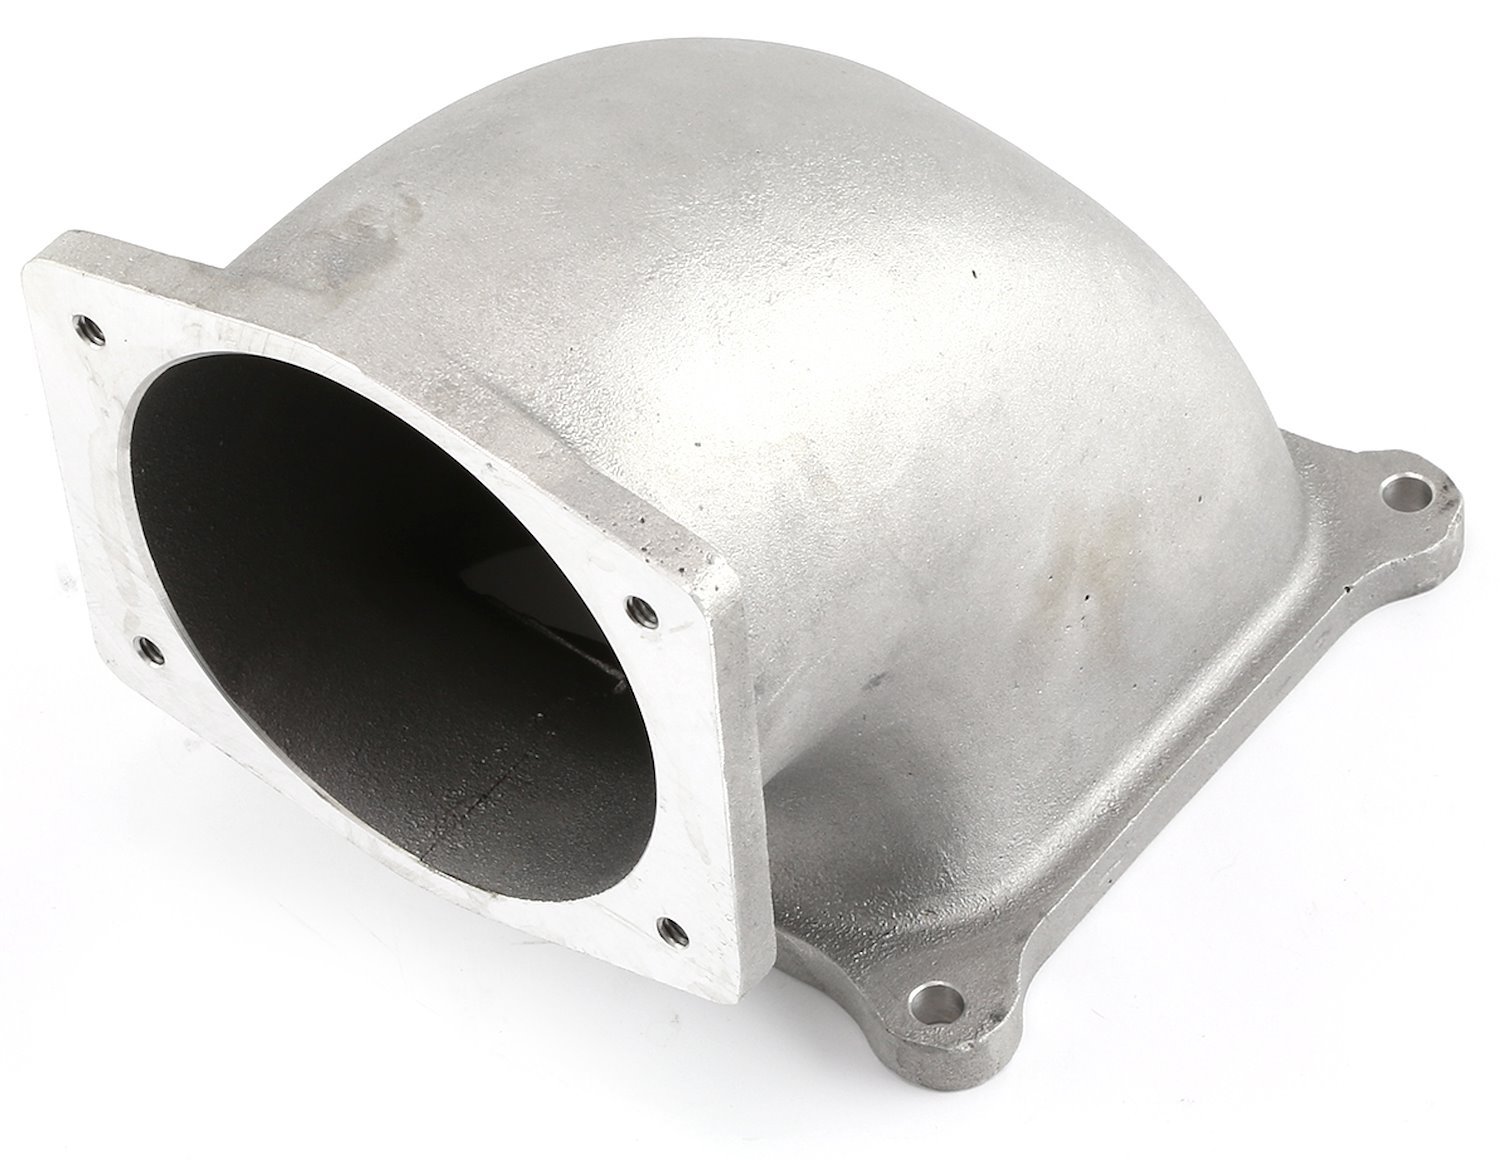 101mm EFI Throttle Body Race Elbow Fits 4500 Carb Flange [LS2 Series 4-Bolt Mounting]